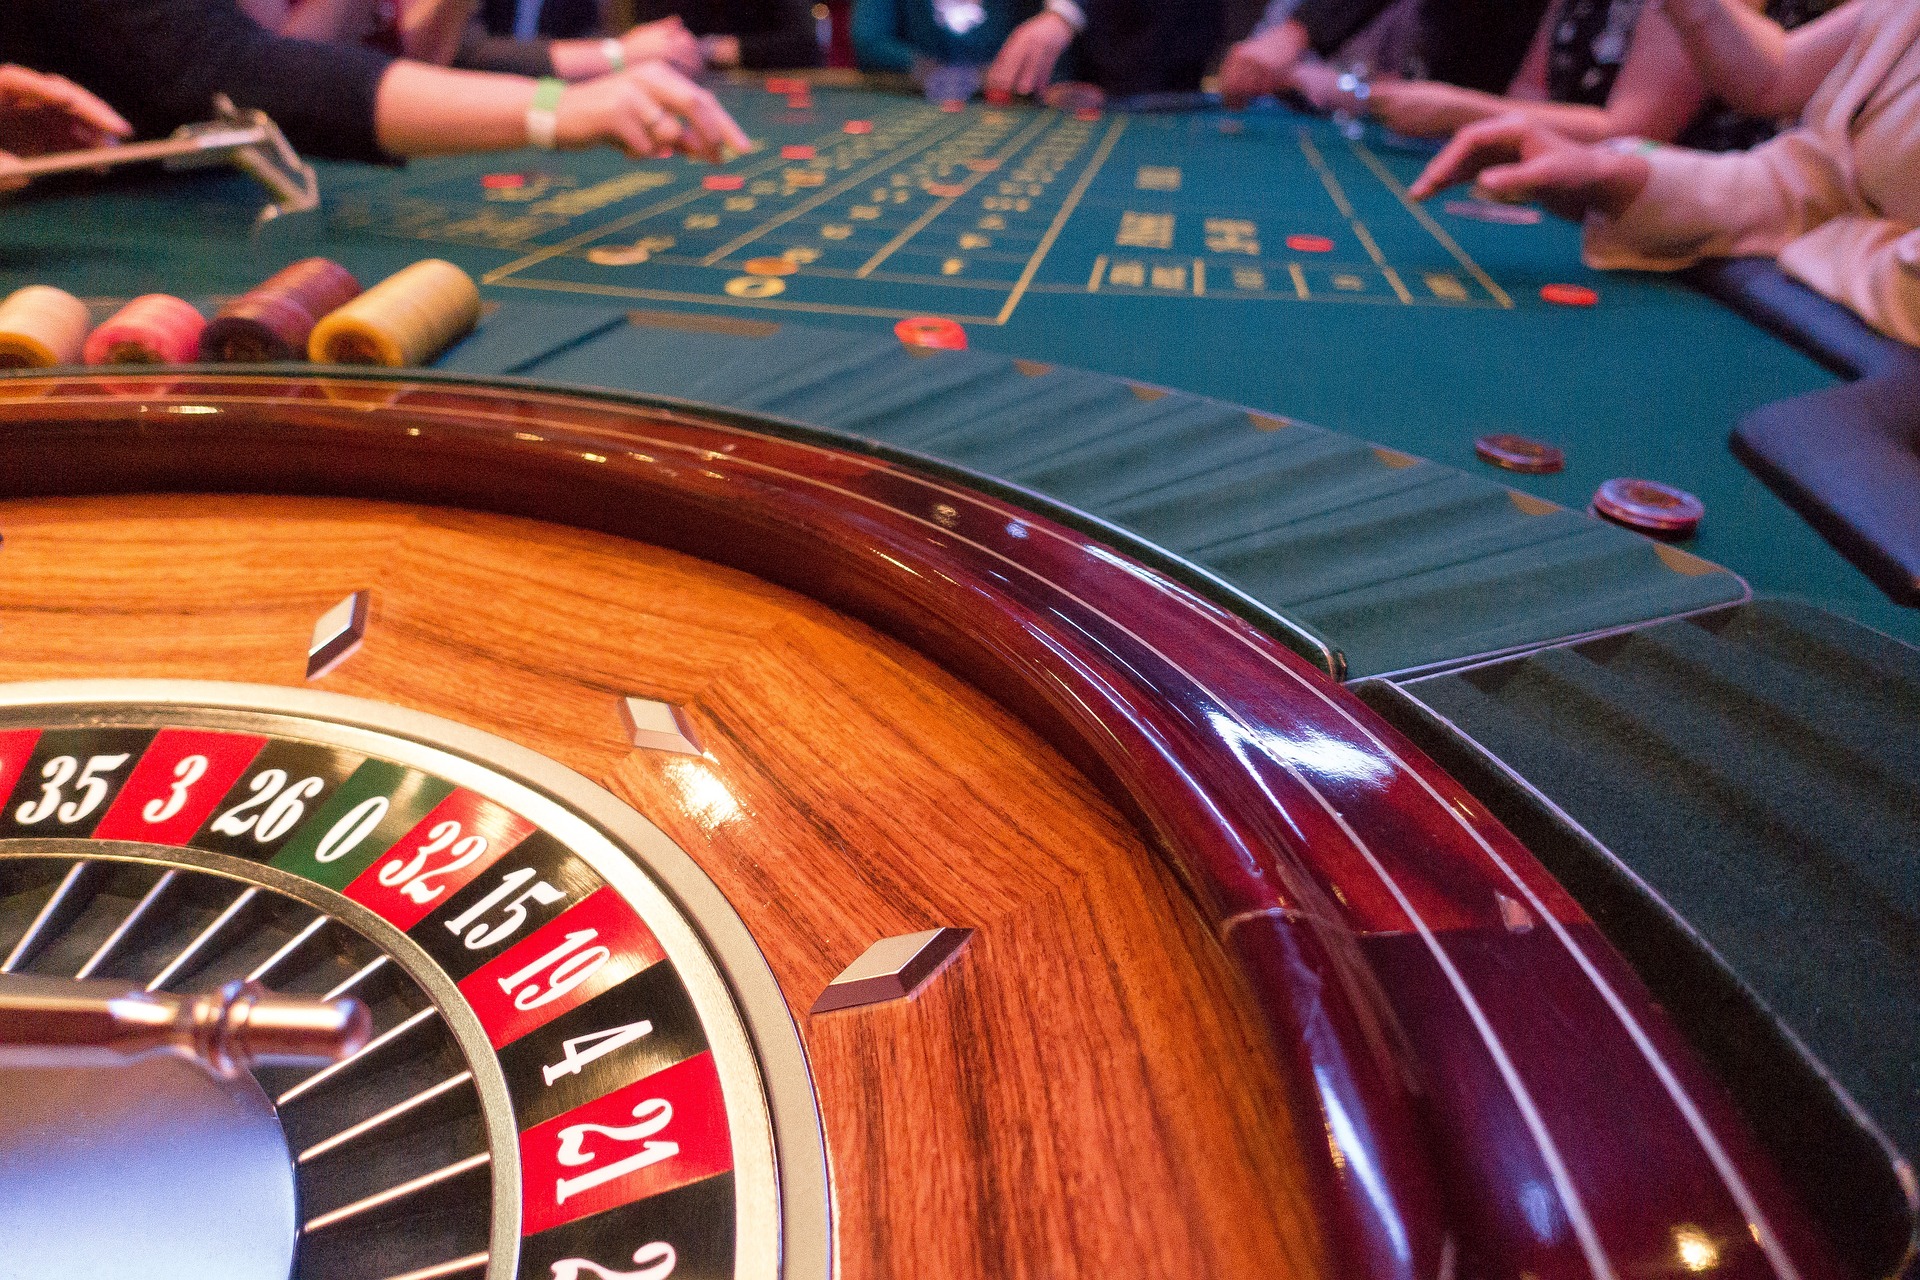 How to Play Roulette on a Cruise Ship